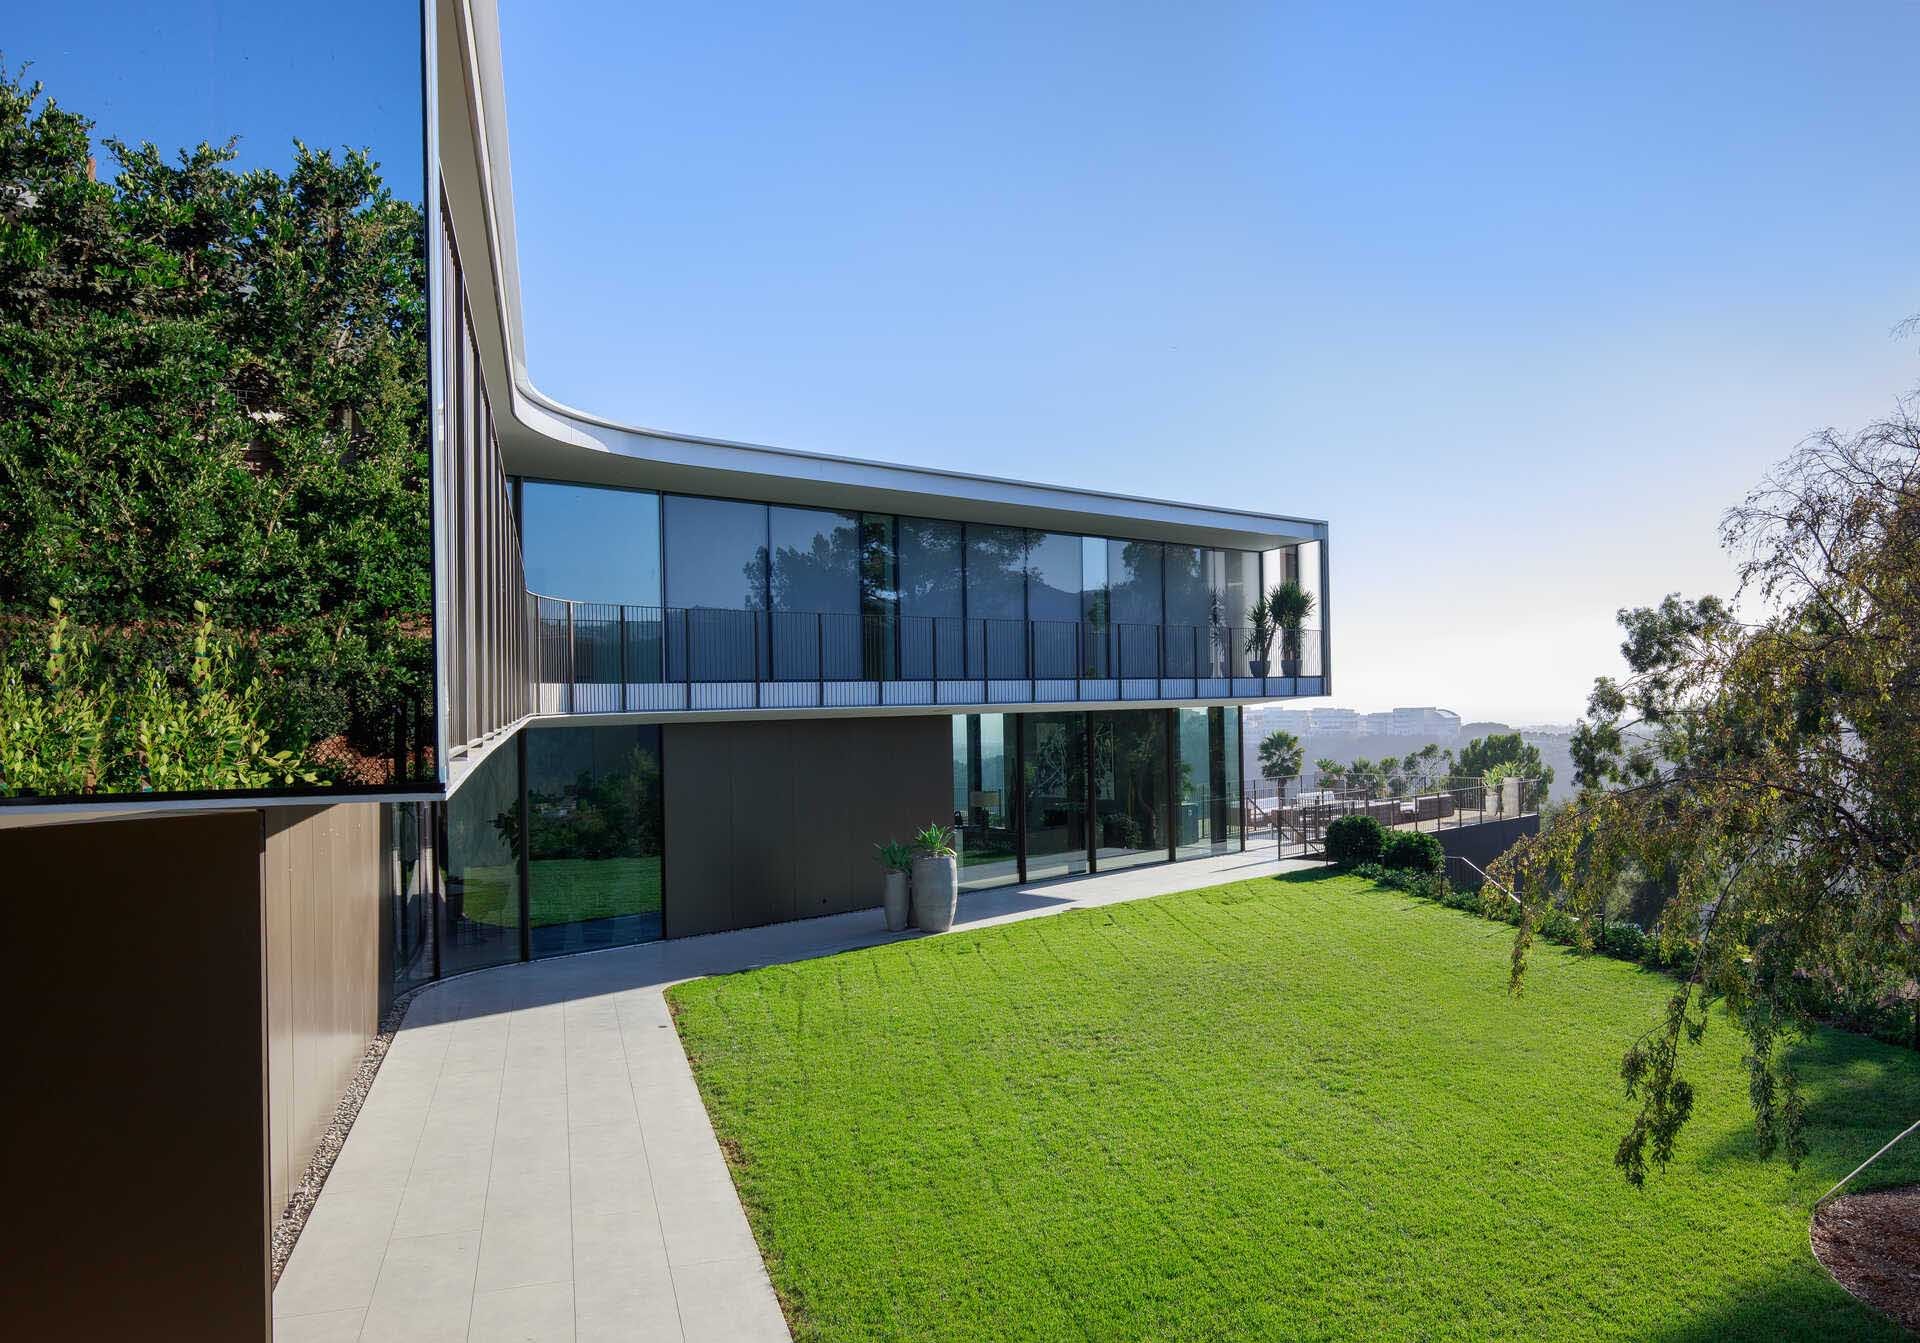 The Orum House in Los Angeles